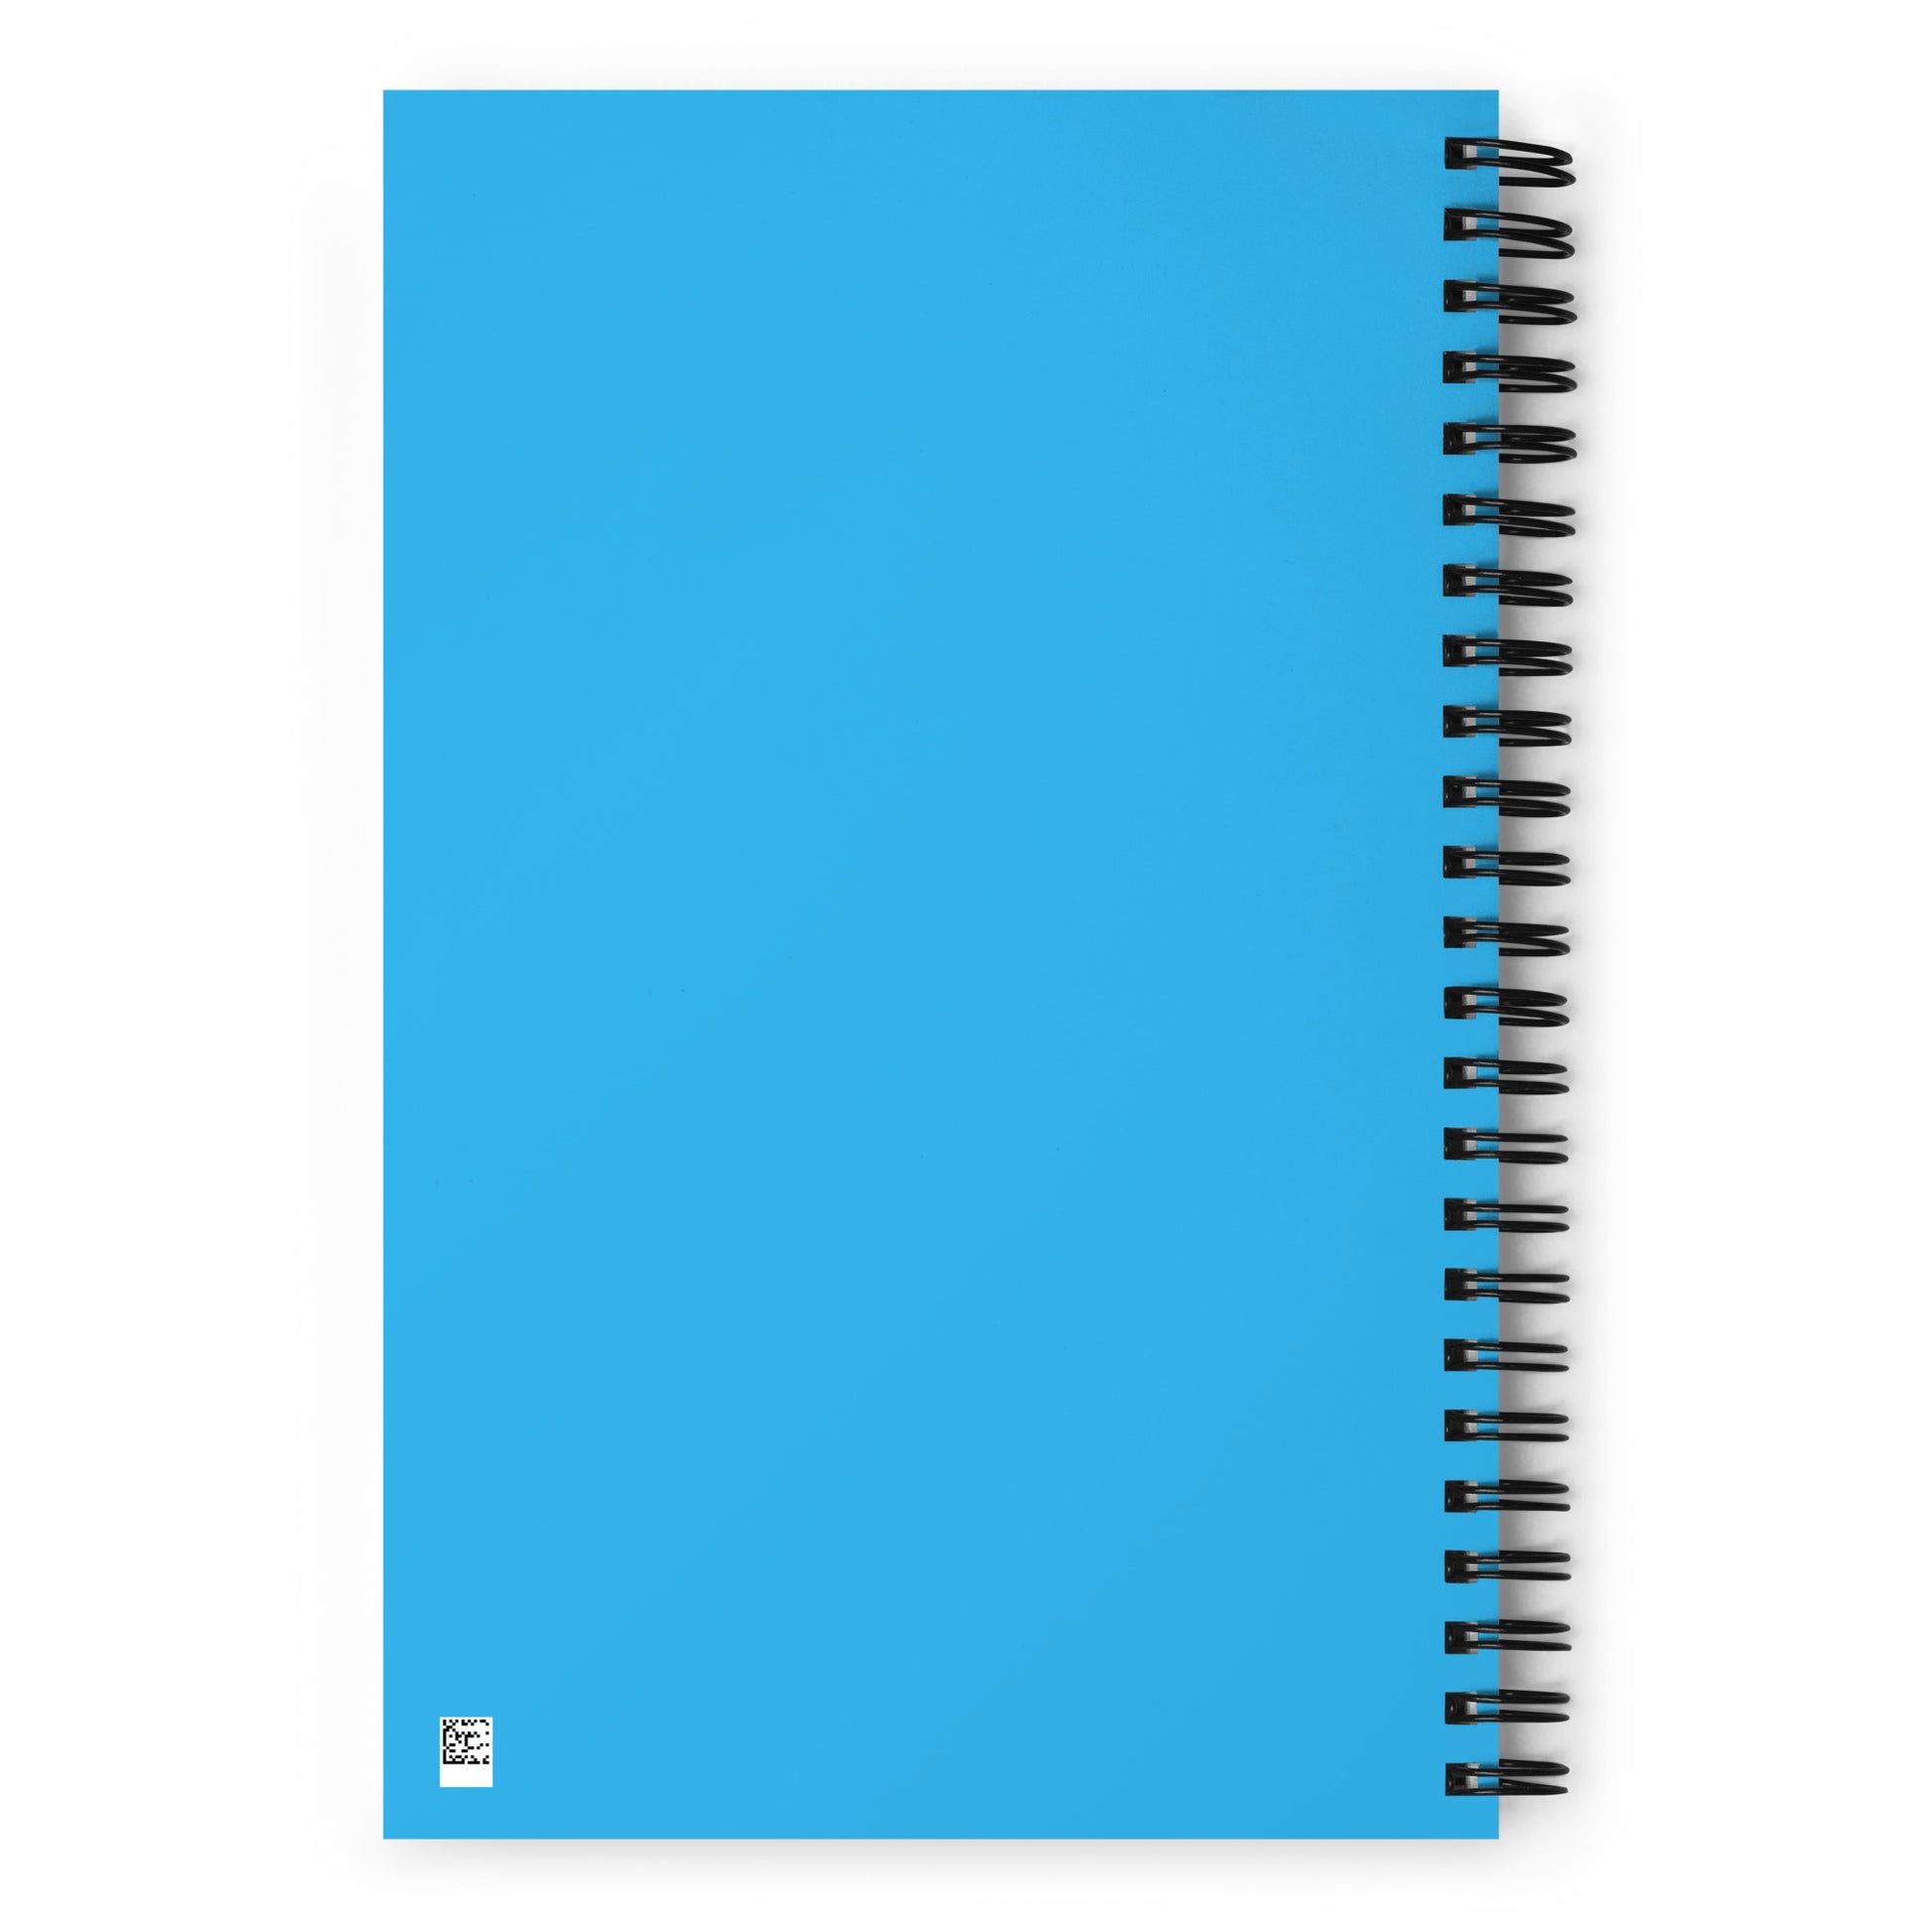 The best, cute, fun 140 page spiral notebook for a doctor or future surgeon